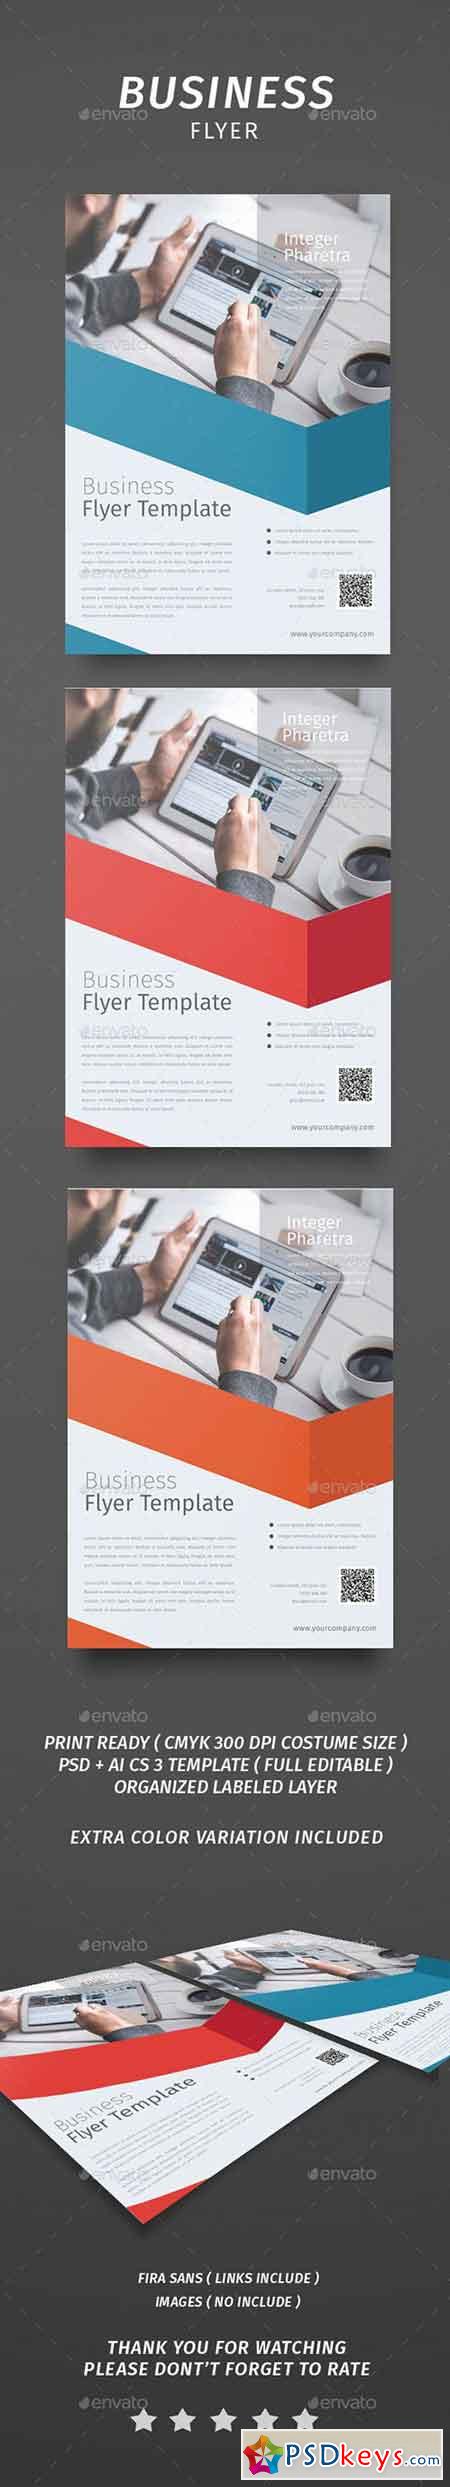 Business Flyer 14365430